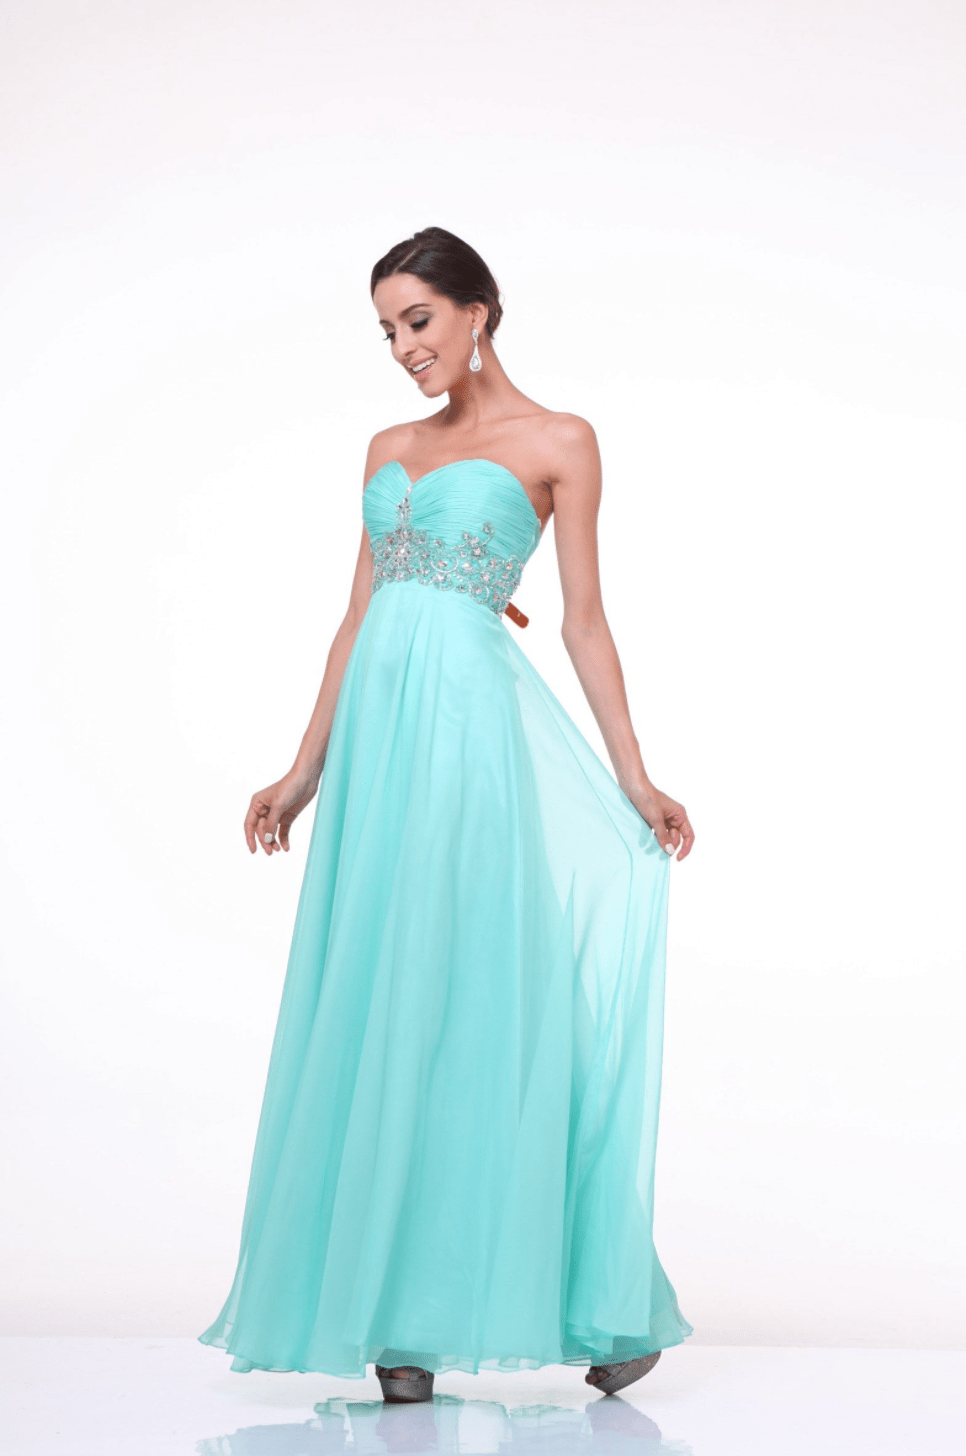 Mint Crystal Chiffon Dress by Ladivine - NORMA REED